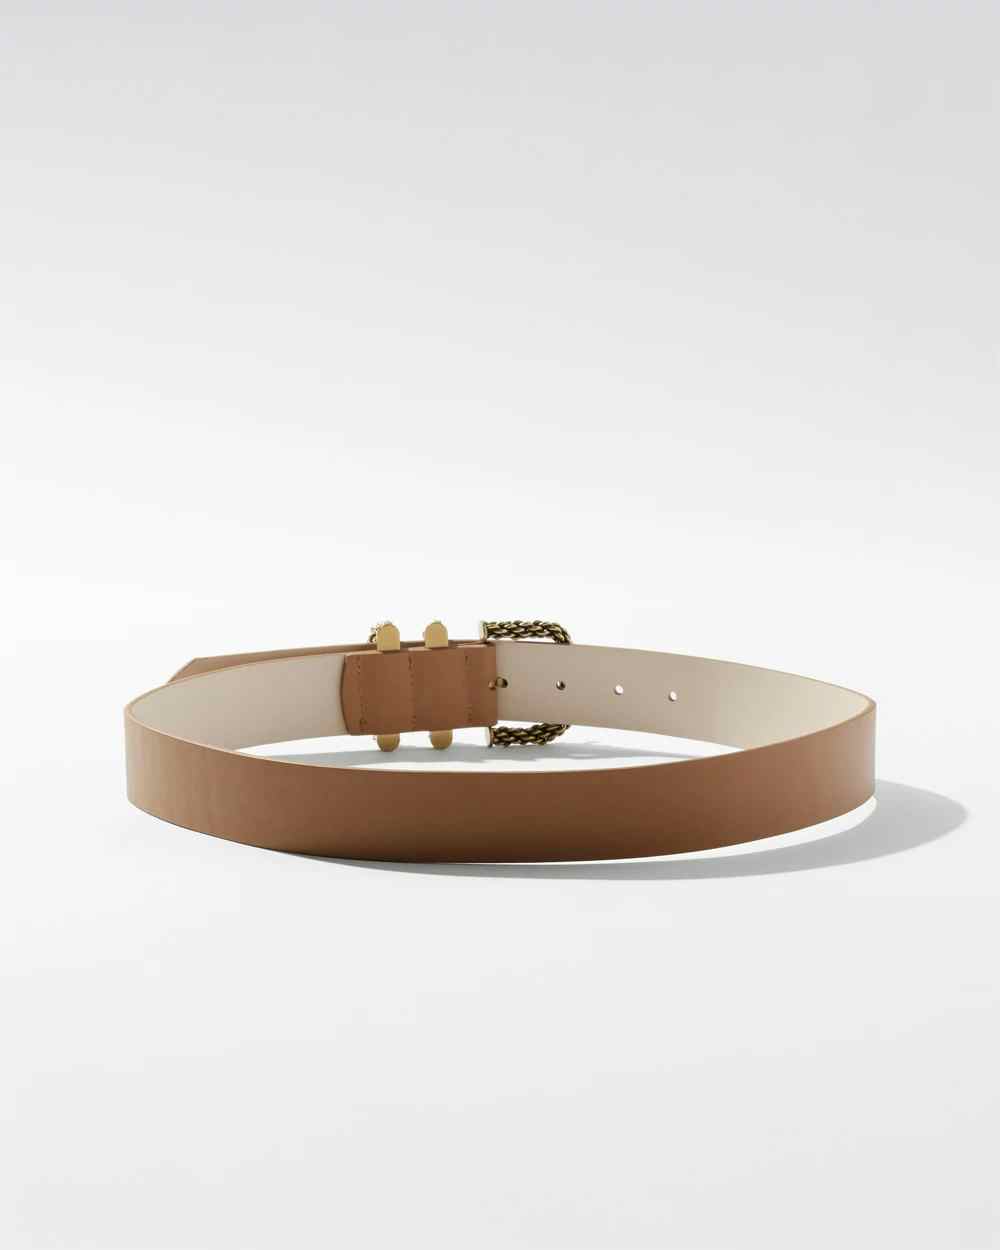 Shop Women's Belts - Skinny, Leather and Stretch Belts | White House ...